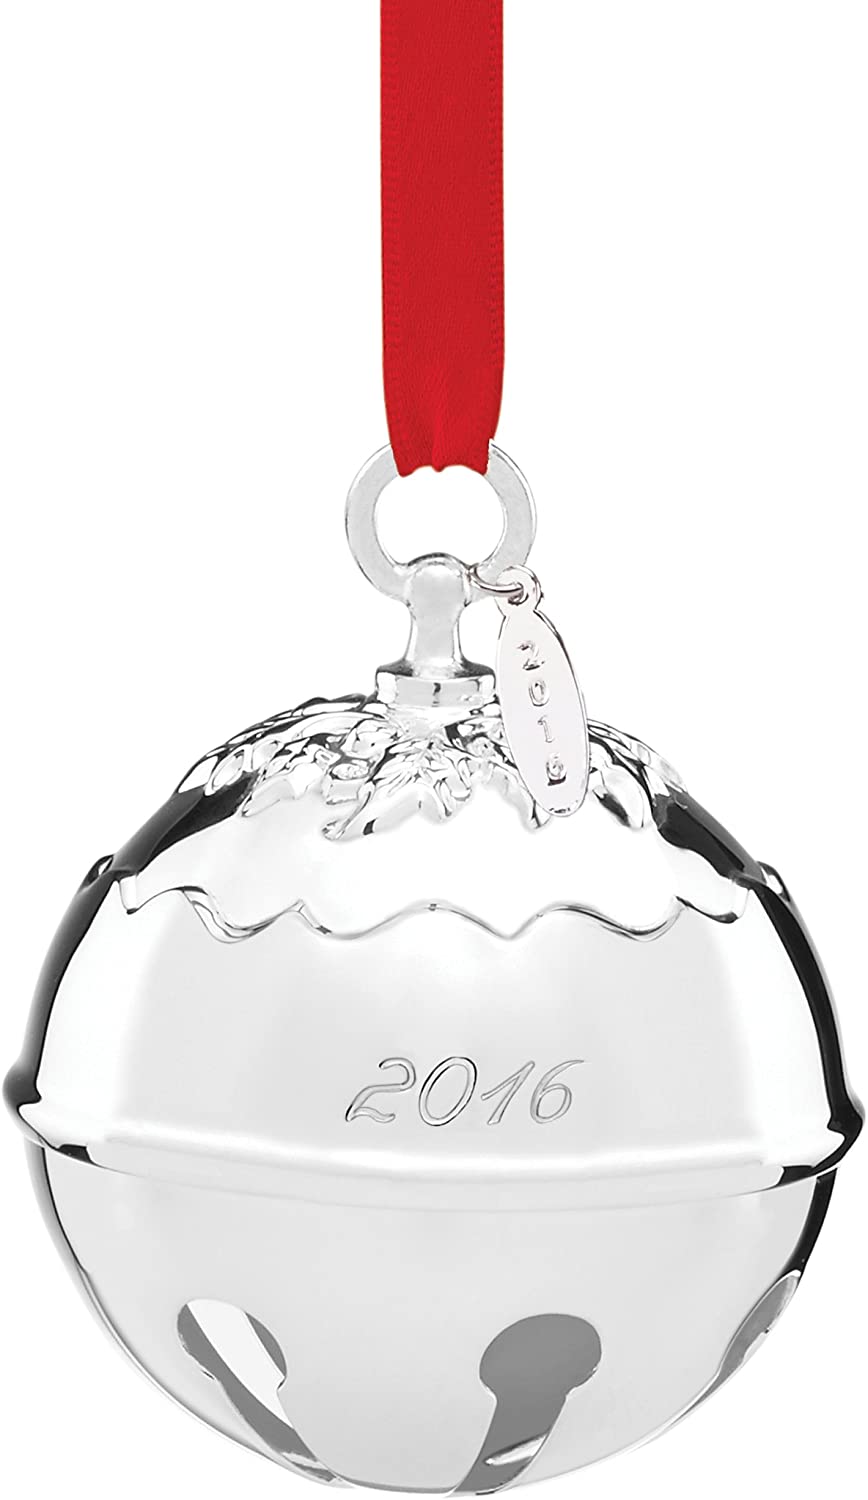 reed-and-barton-holly-bell-ornament-2016-41st-edition-3.25-in-2016.jpg